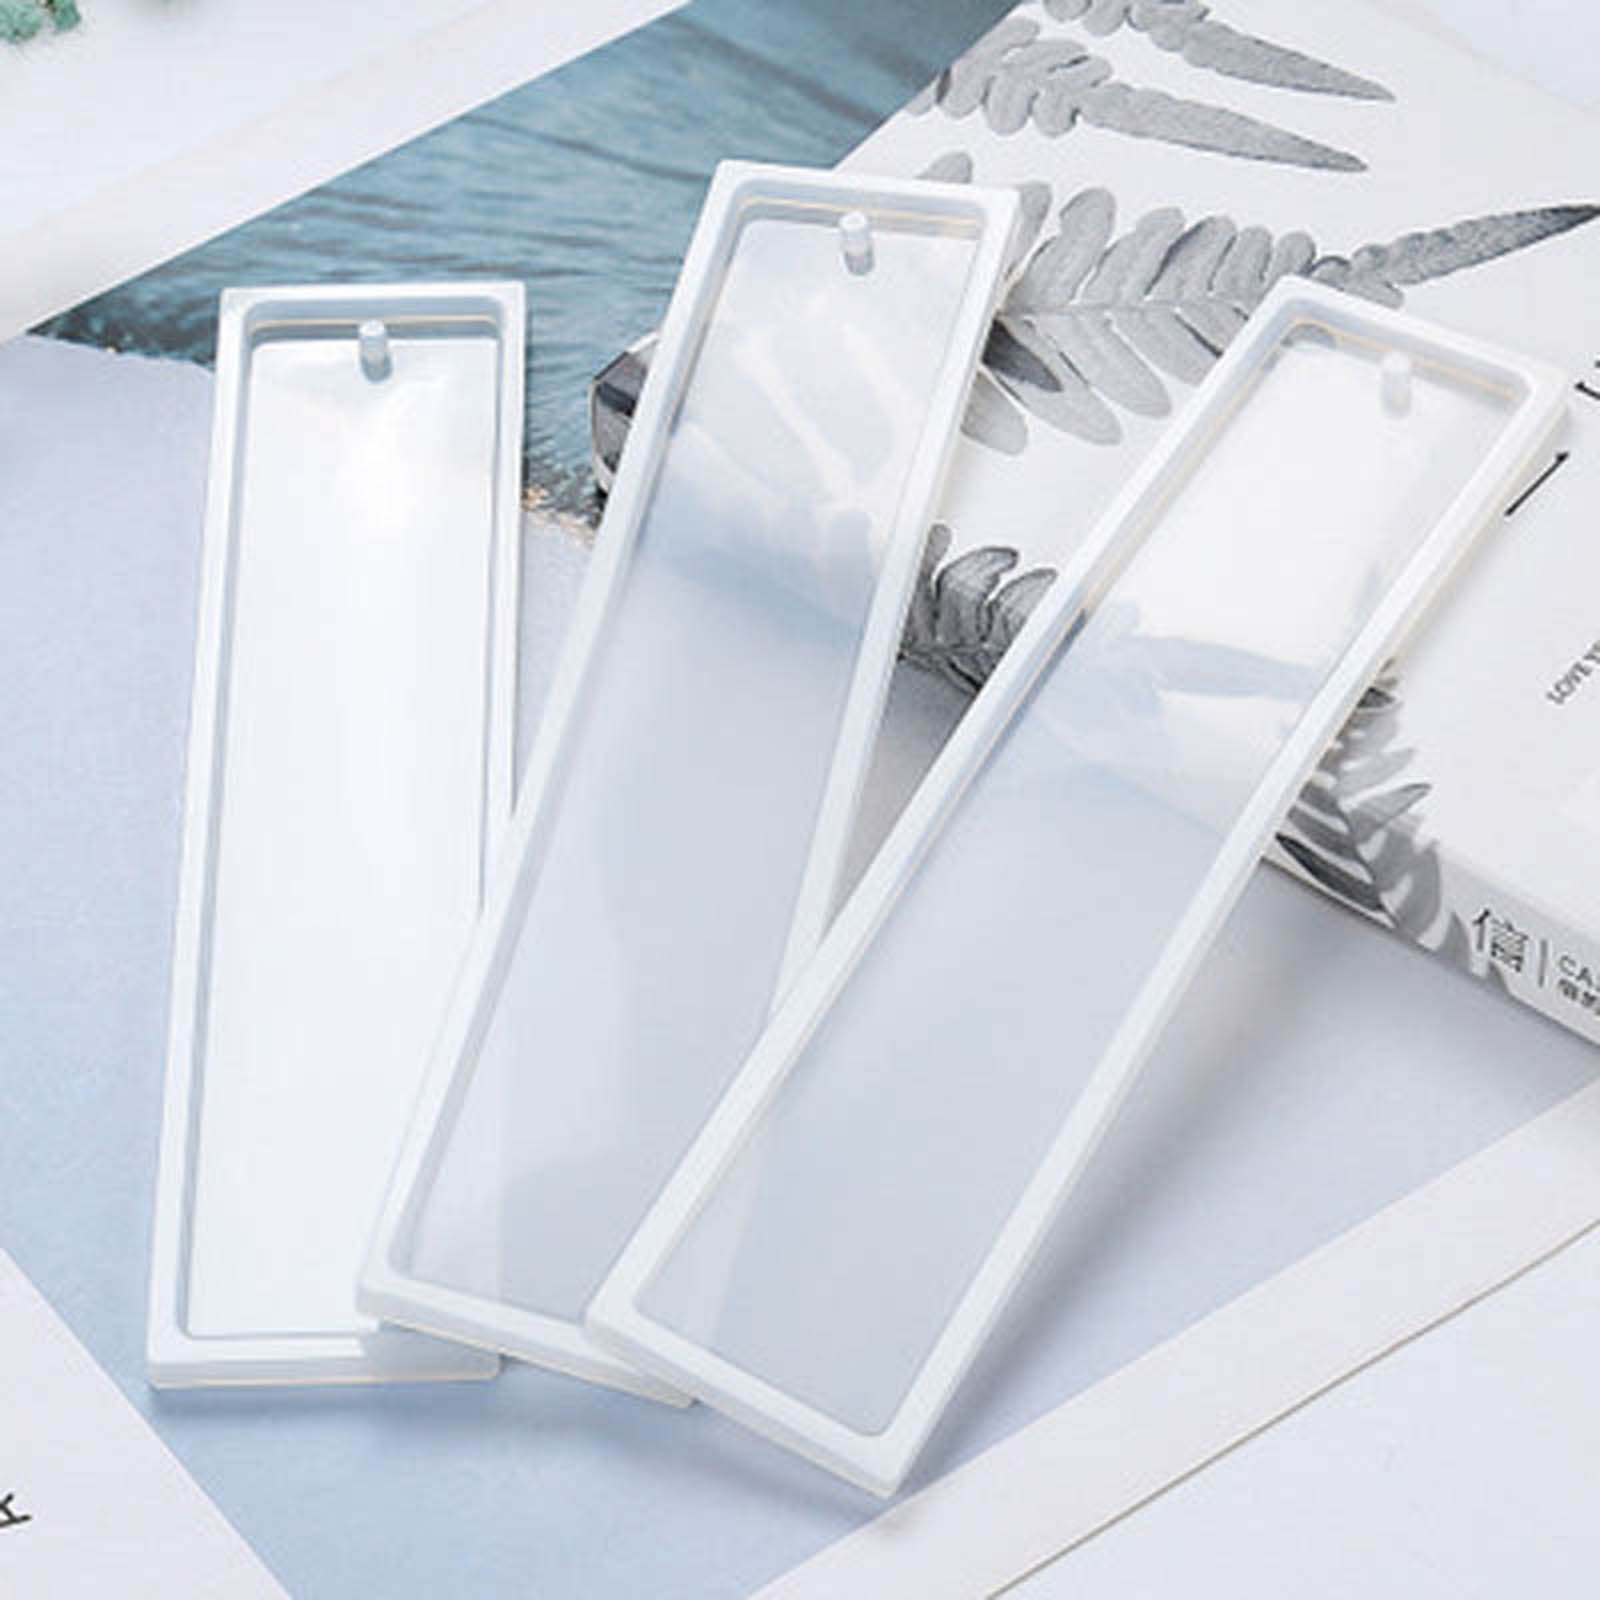 Picture of Silicone Resin Mold For Jewelry Making Bookmark White 14cm x 2.7cm, 2 PCs